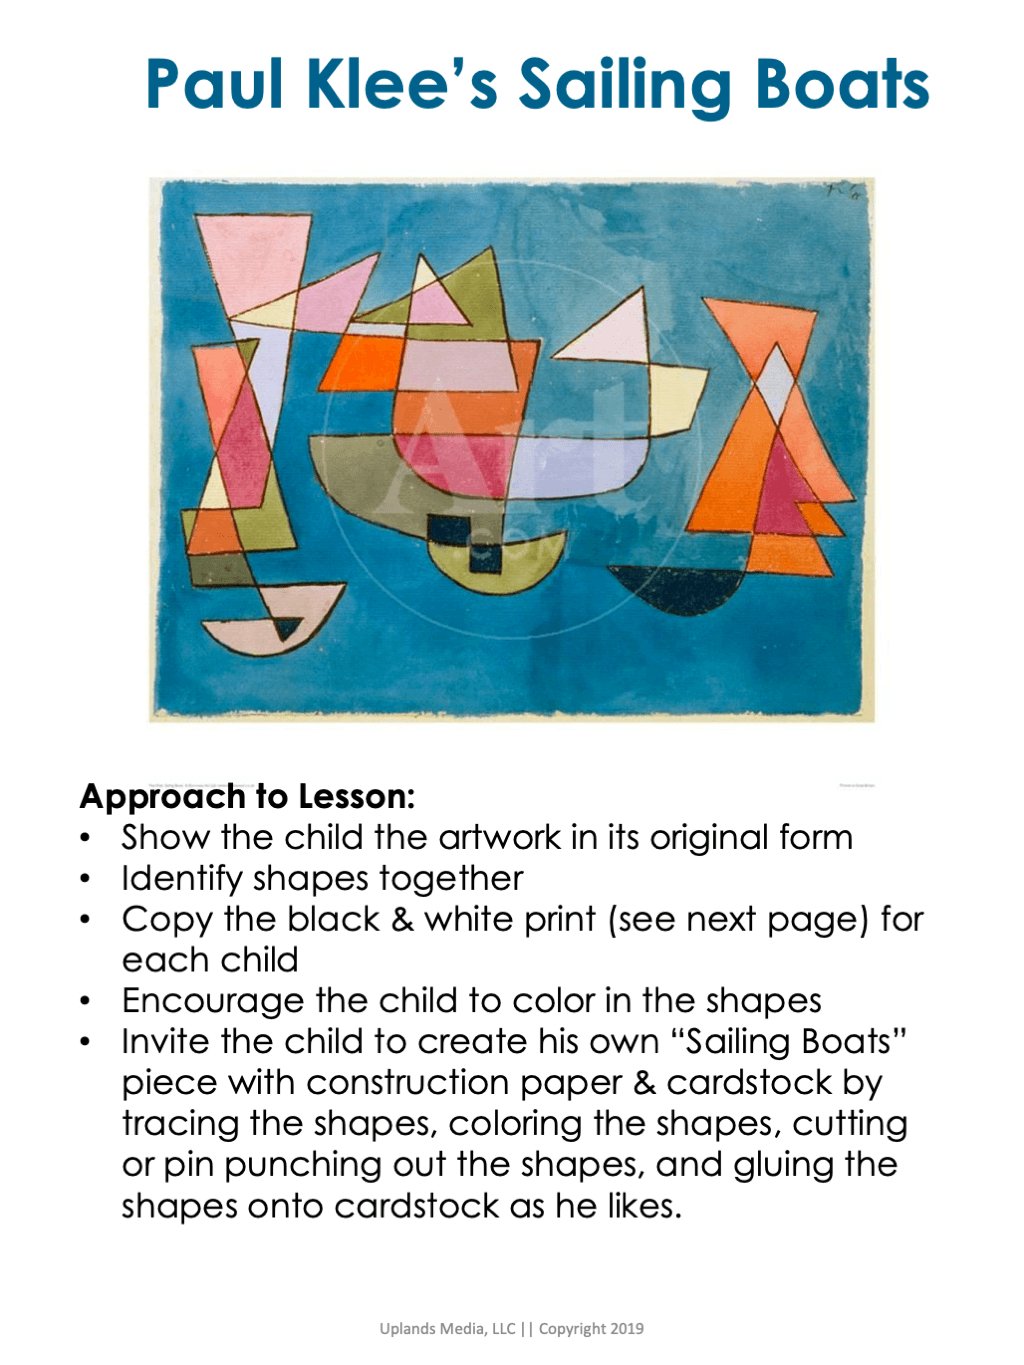 🎨 Famous Artists Preschool Study - Printables by Carrots Are Orange